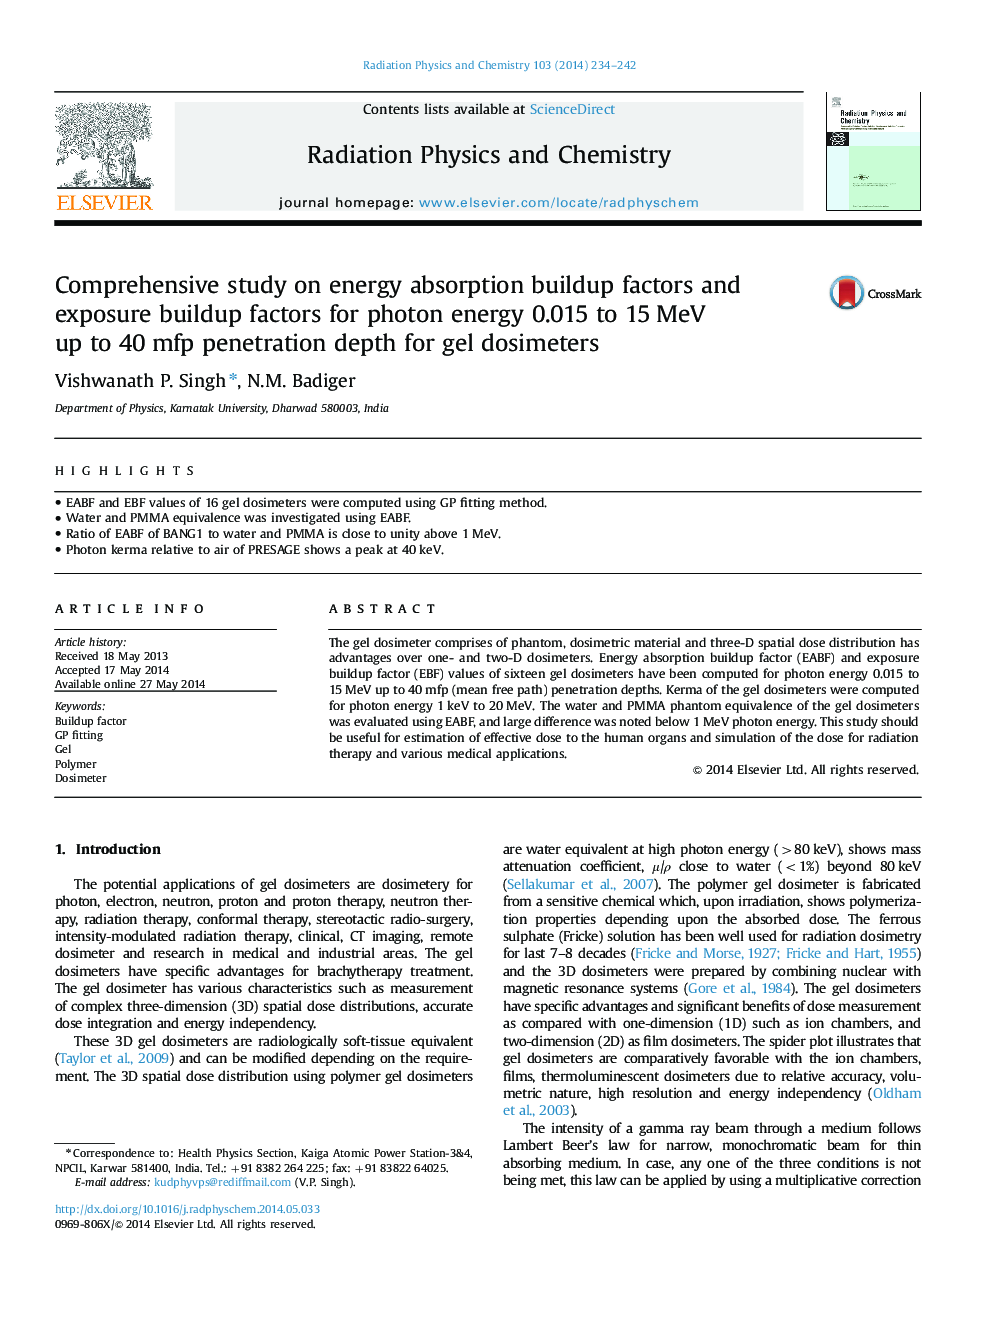 Comprehensive study on energy absorption buildup factors and exposure buildup factors for photon energy 0.015 to 15 MeV up to 40 mfp penetration depth for gel dosimeters